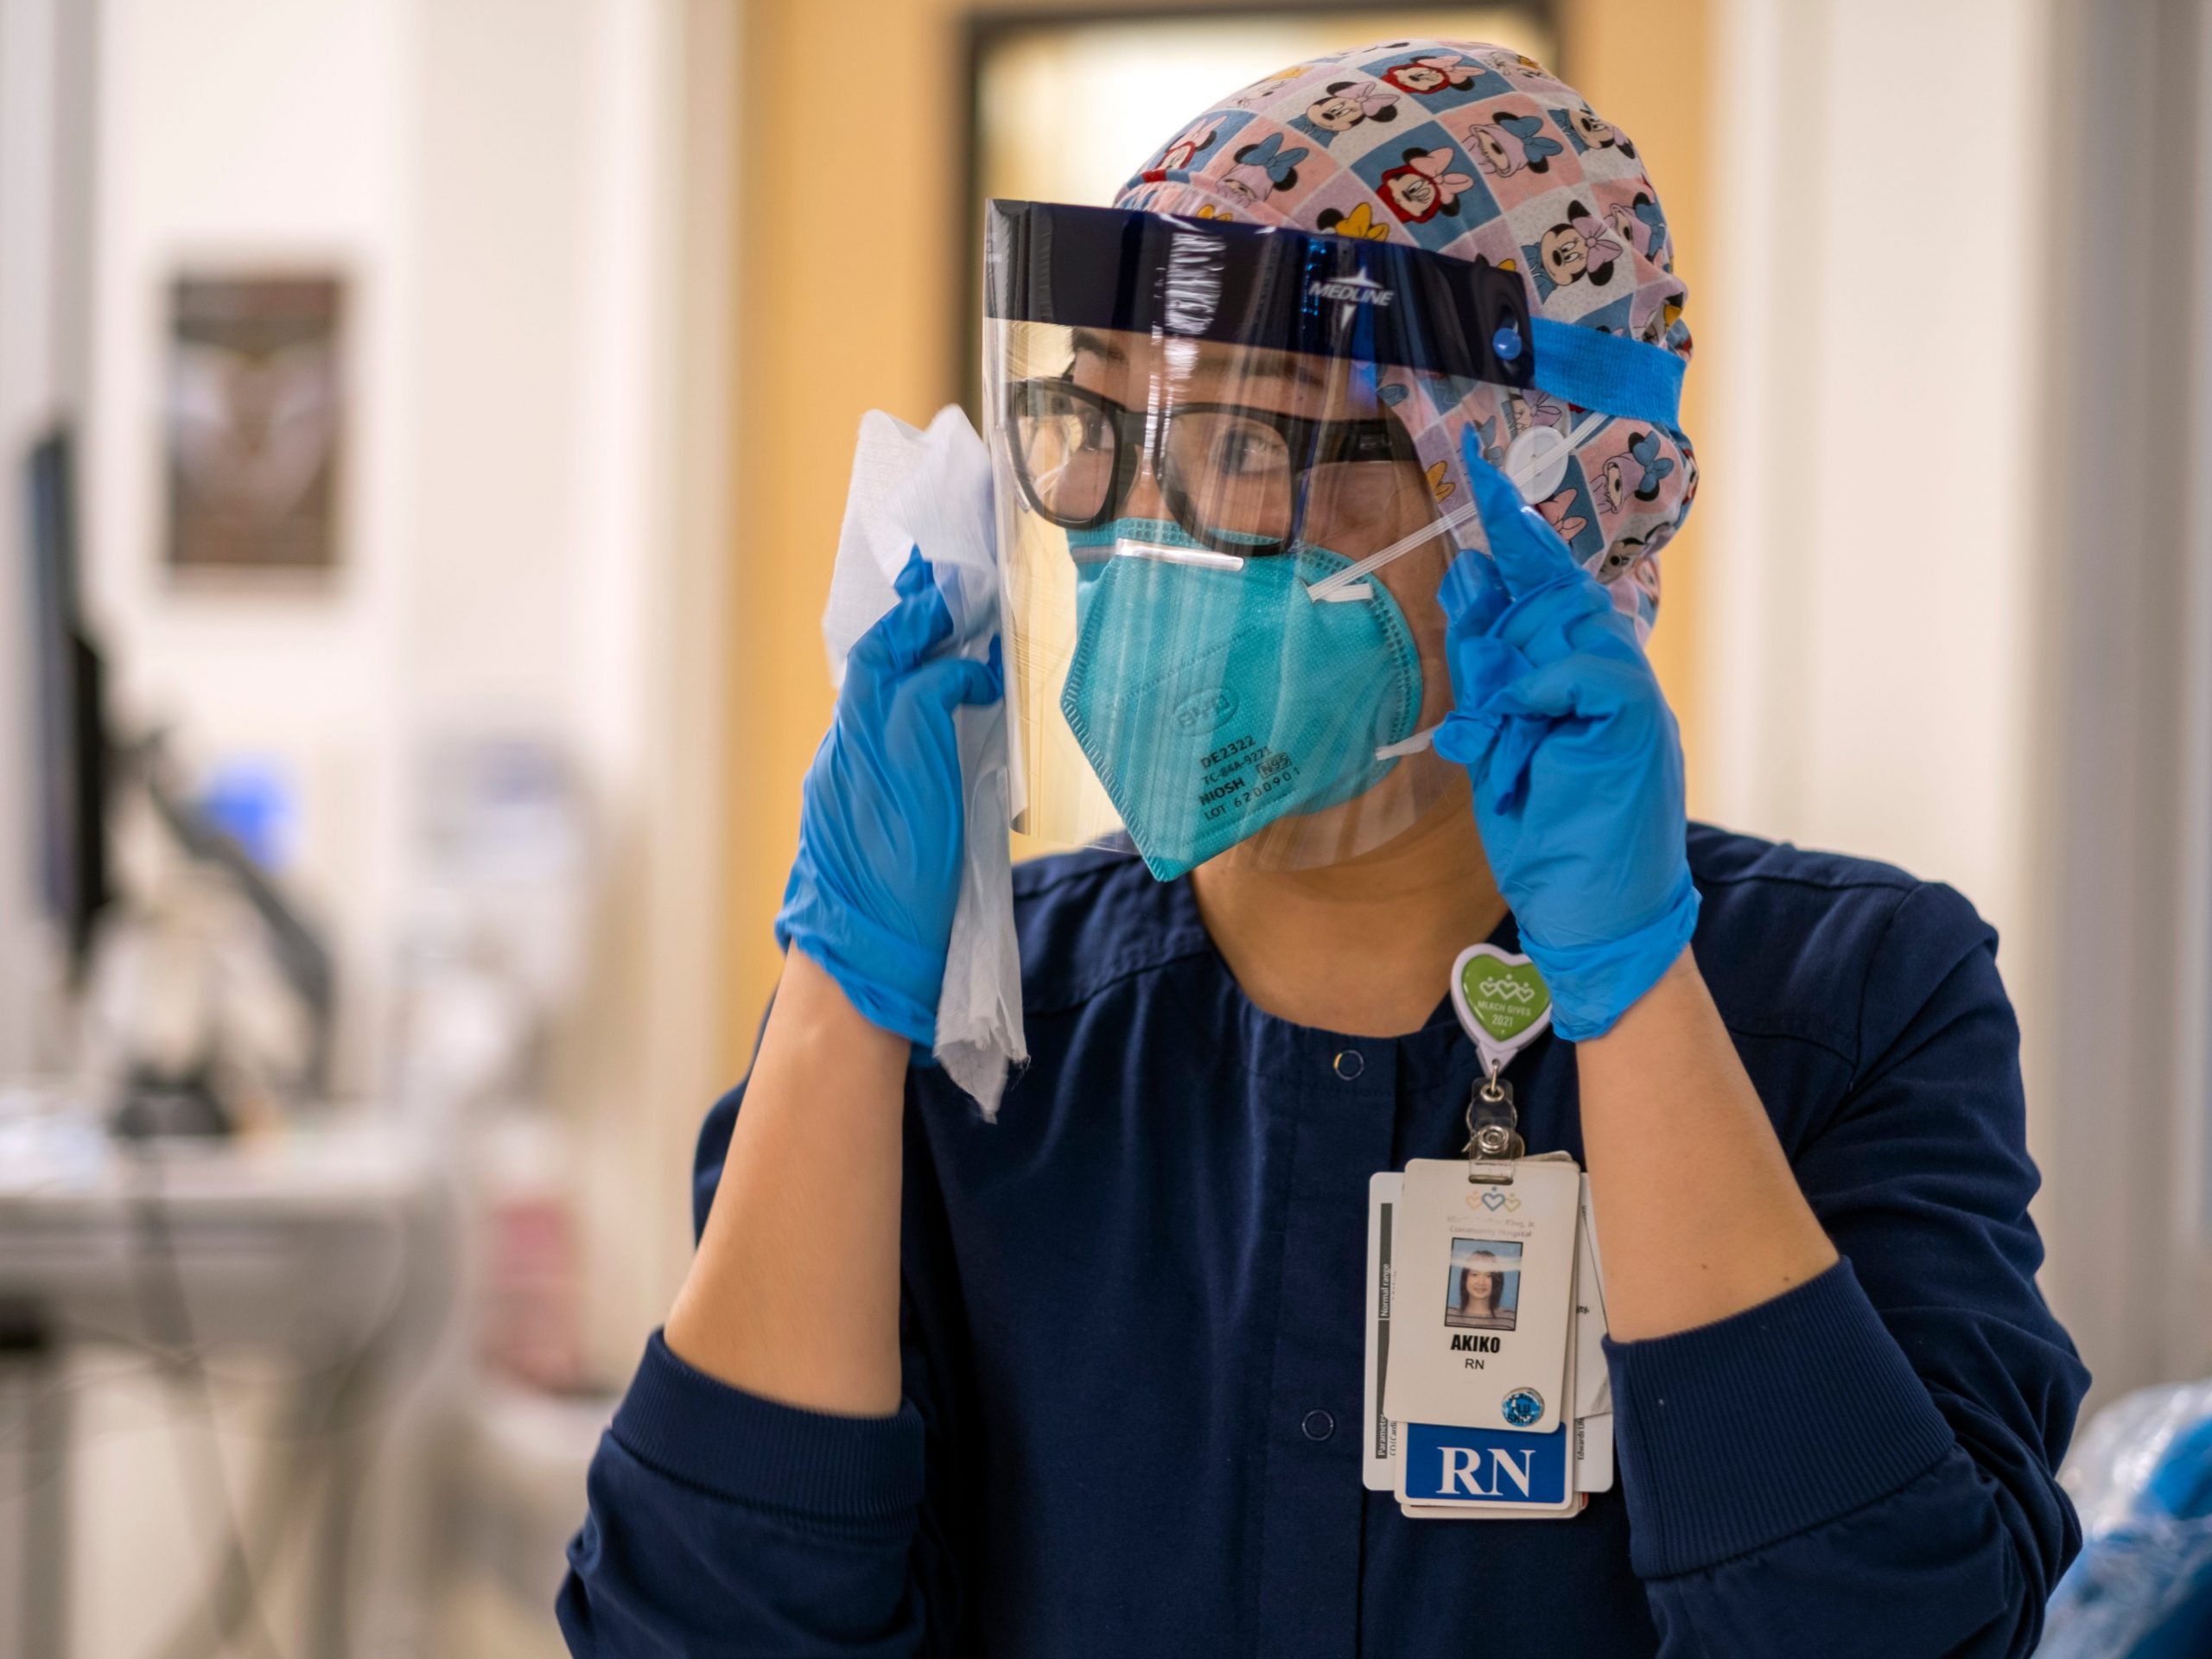 Registered nurse Akiko Gordon looks around the ICU while wearing a face shield, N95 mask, and scrubs.